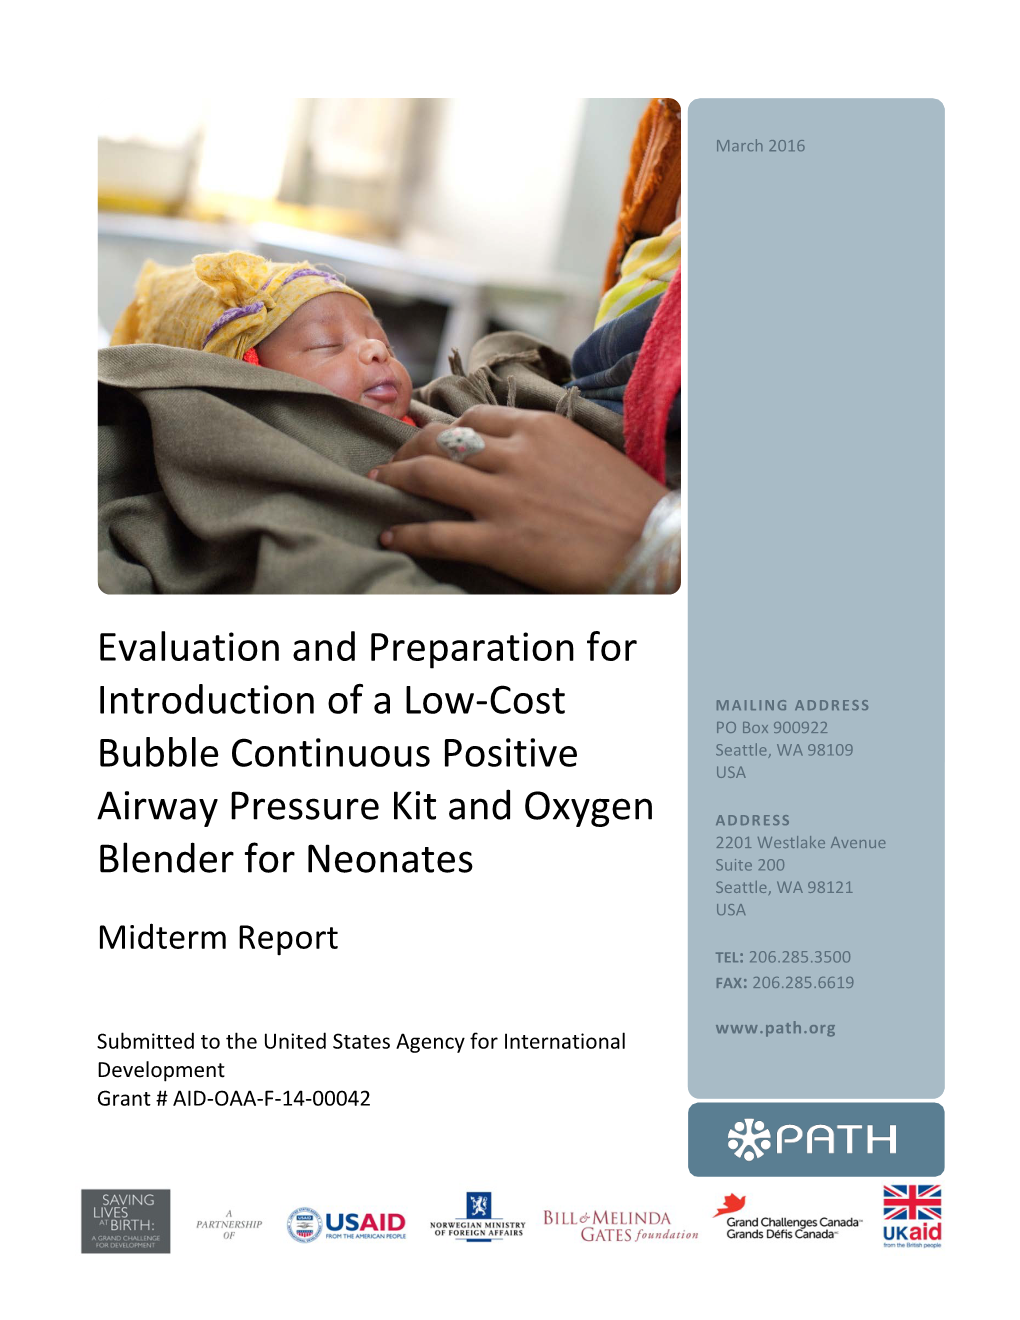 Evaluation and Preparation for Introduction of a Low-Cost Bubble